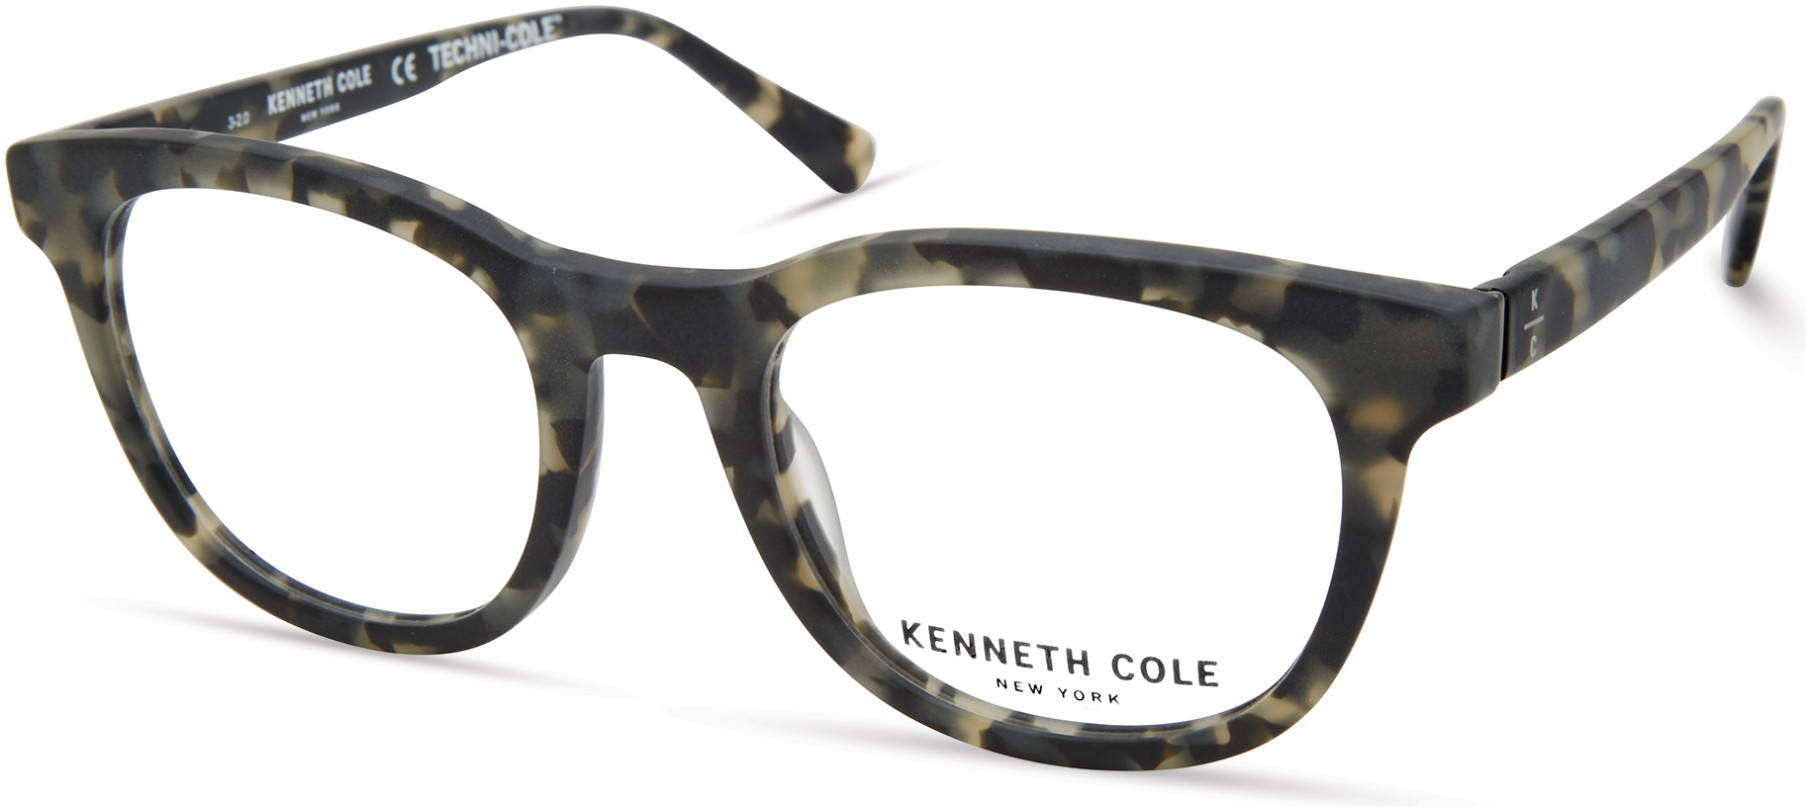 KENNETH COLE NY 0321